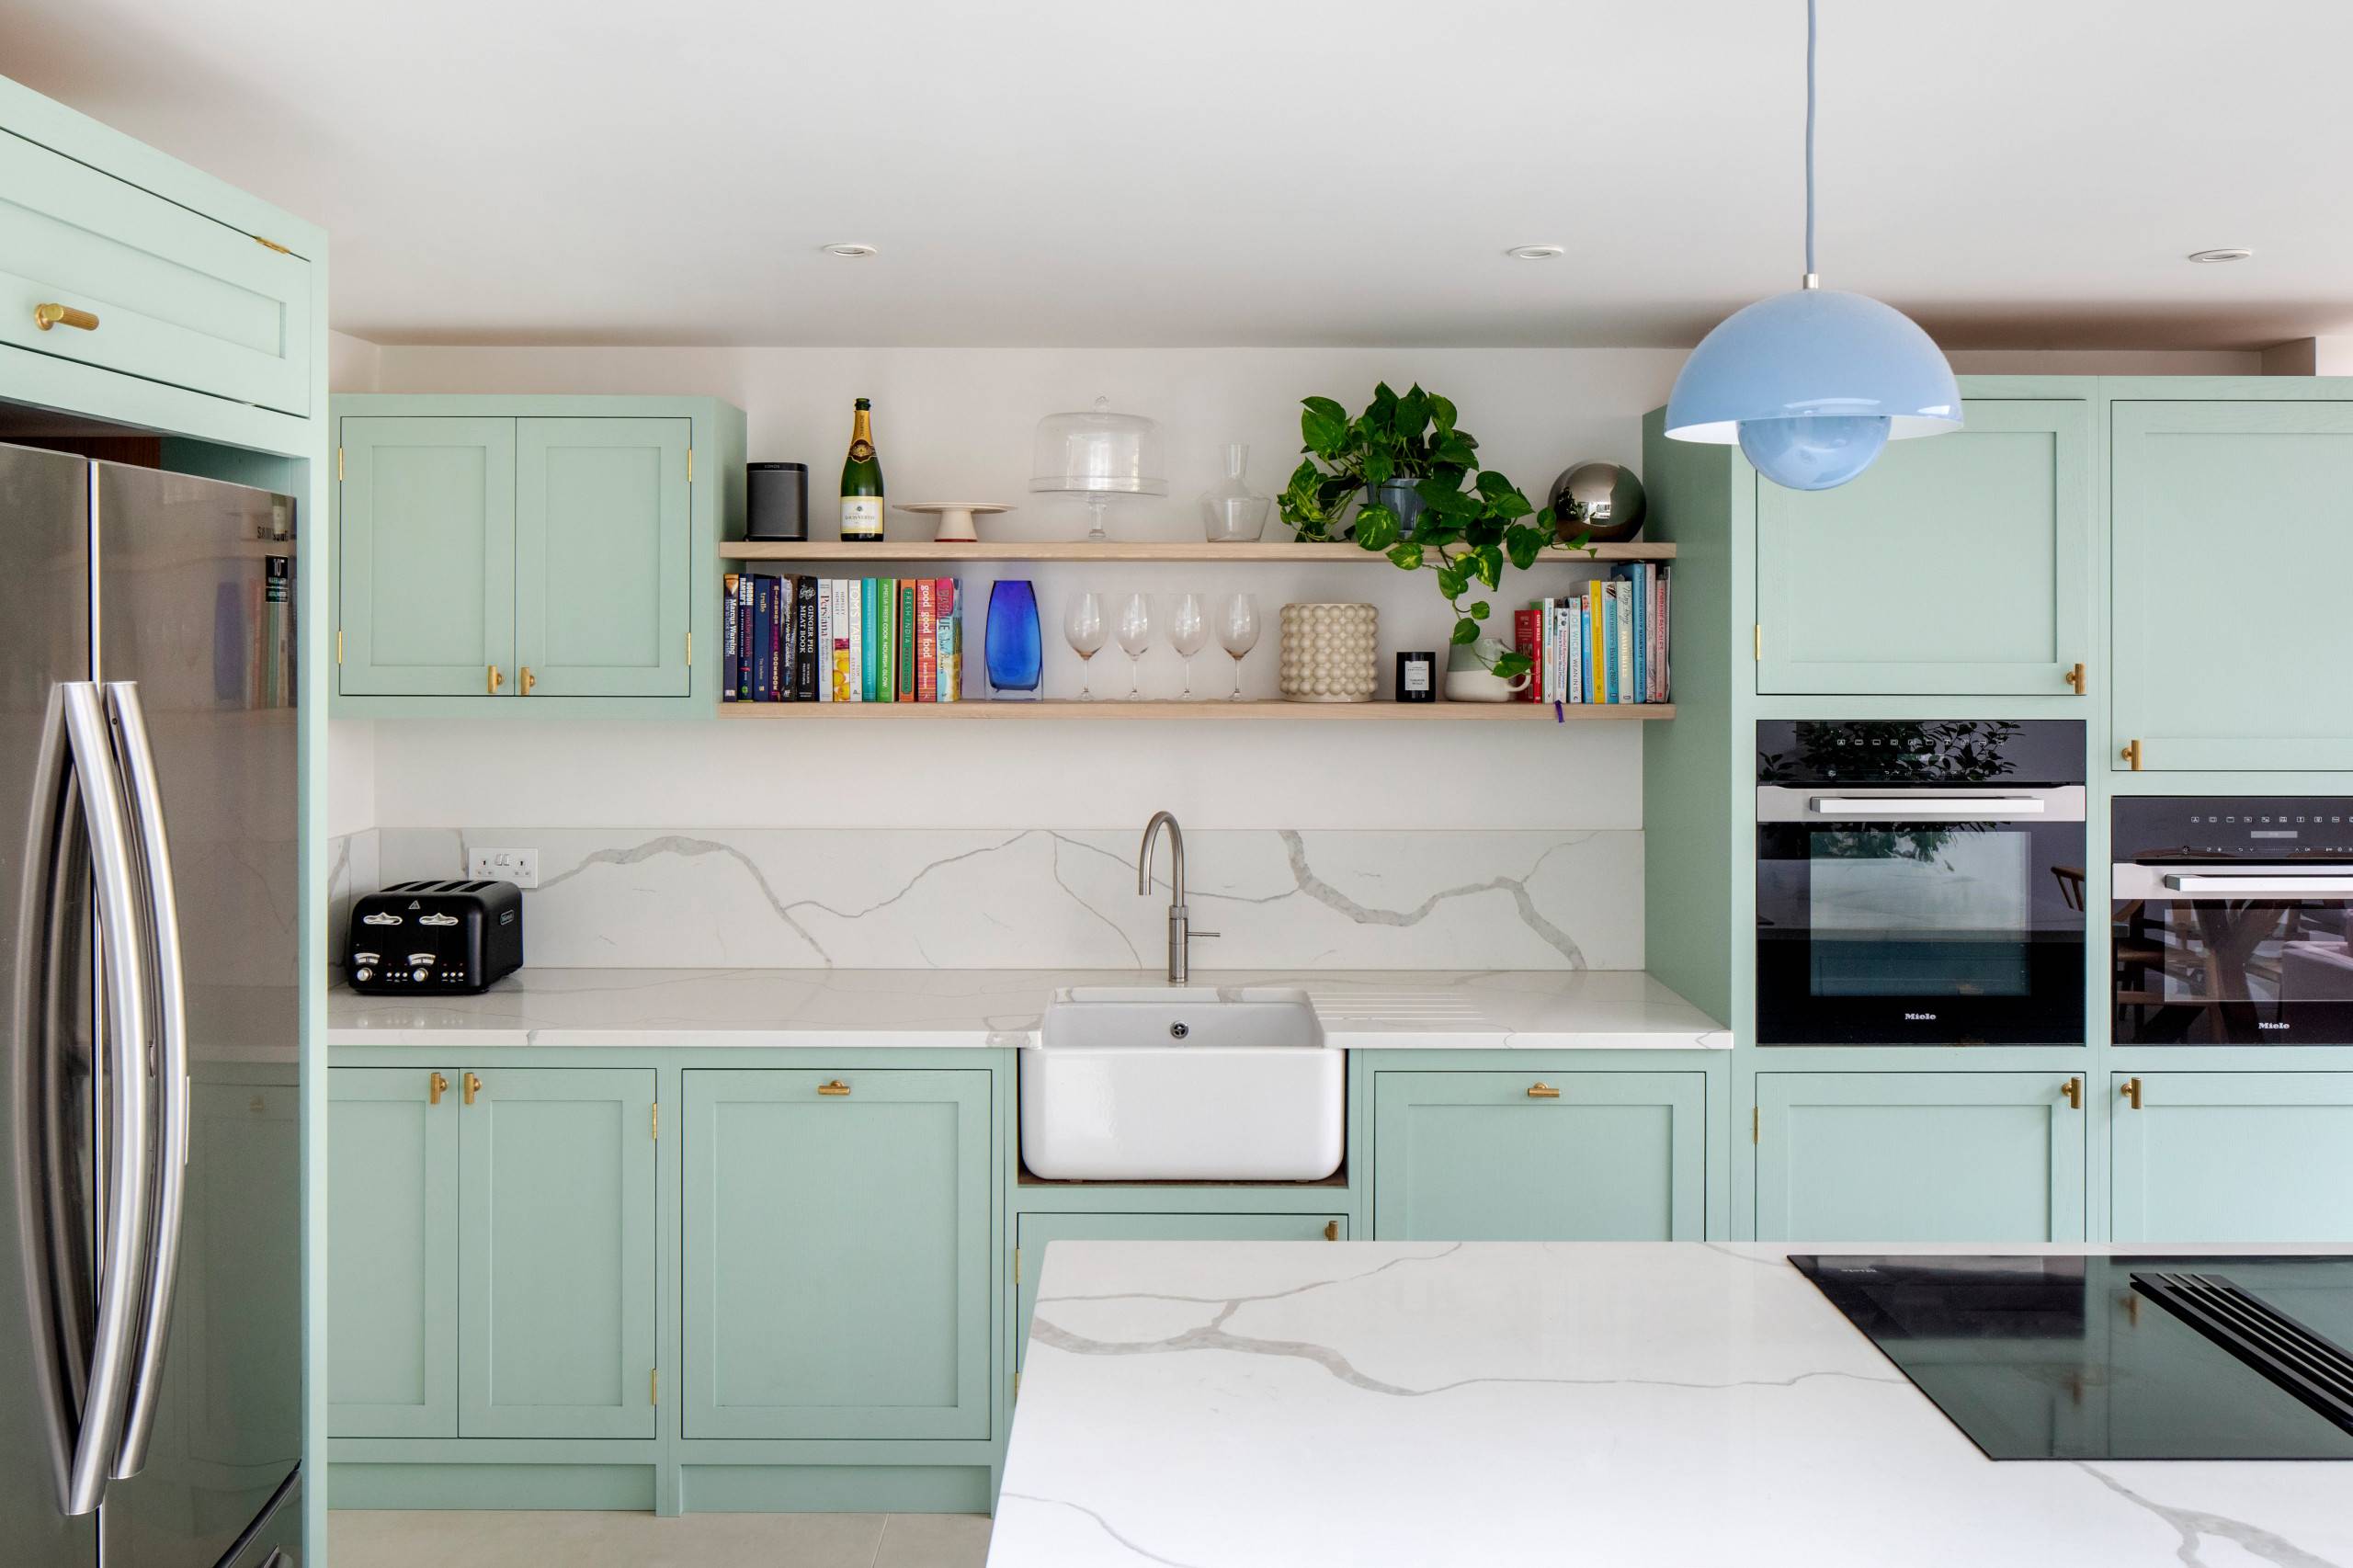 Pistachio green will be a popular trend in 2022 (from Houzz)